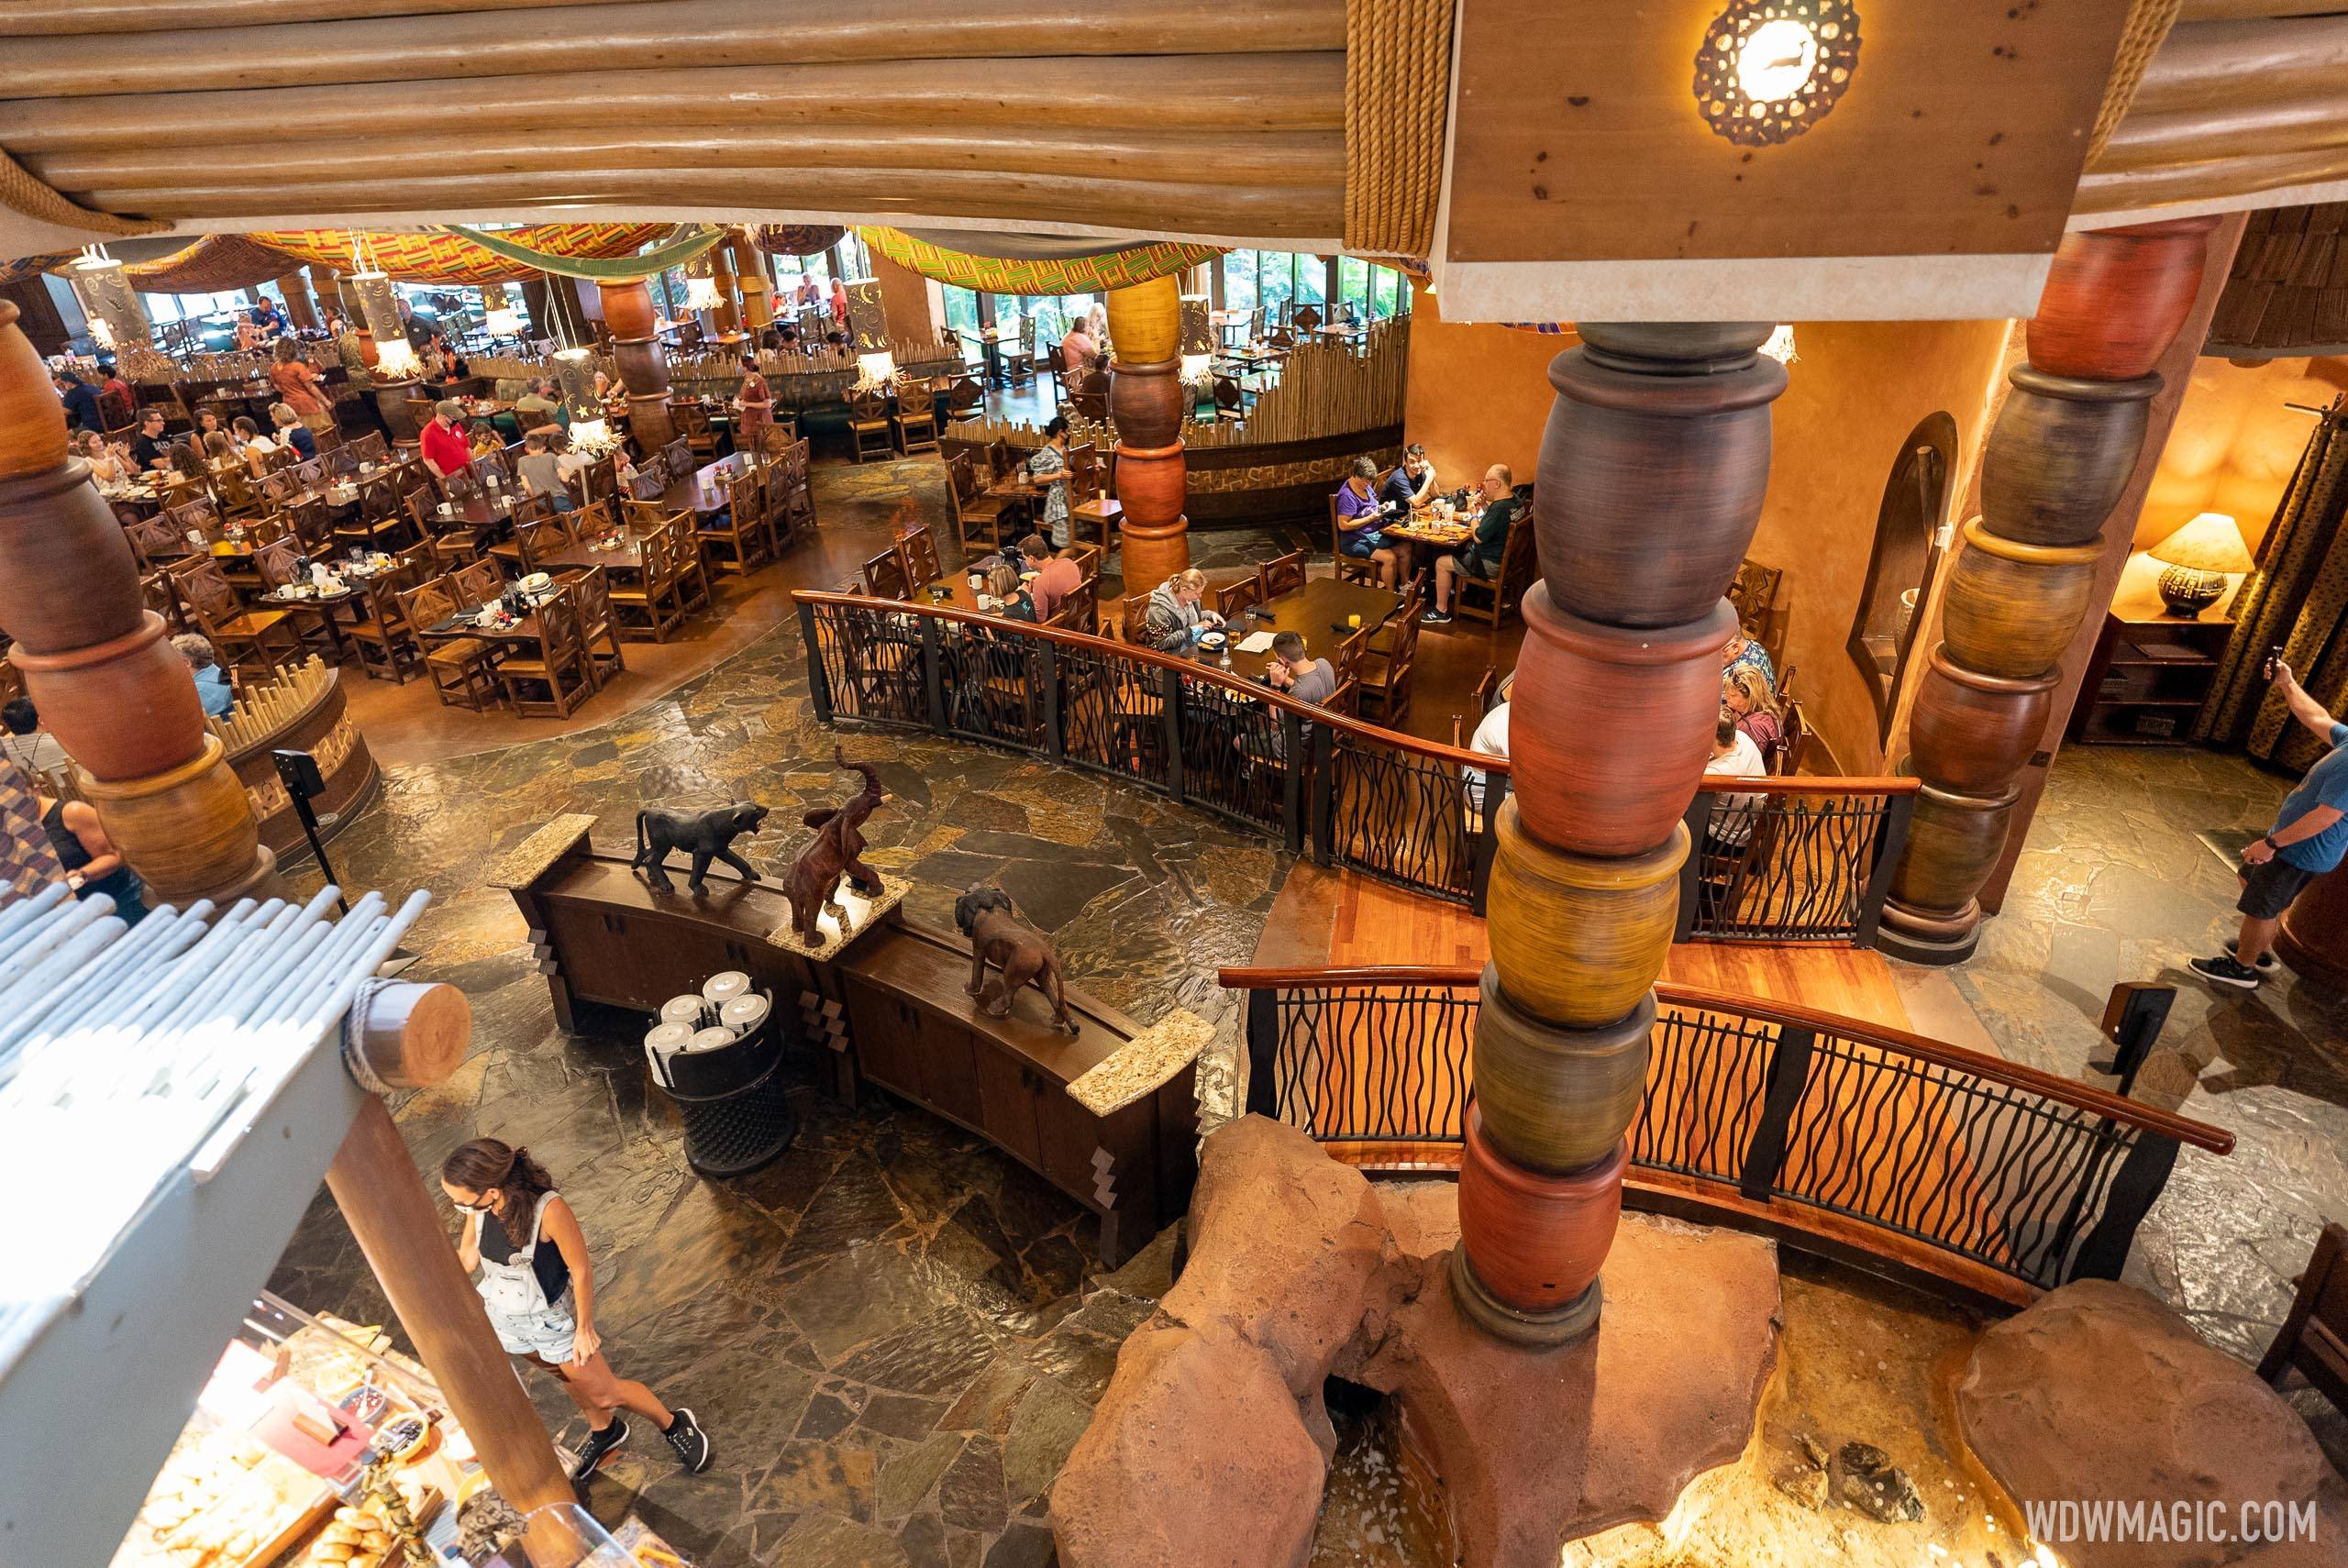 Disney's late-notice cancellation penalty was introduced in 2011 to improve restaurant availability as demand increased